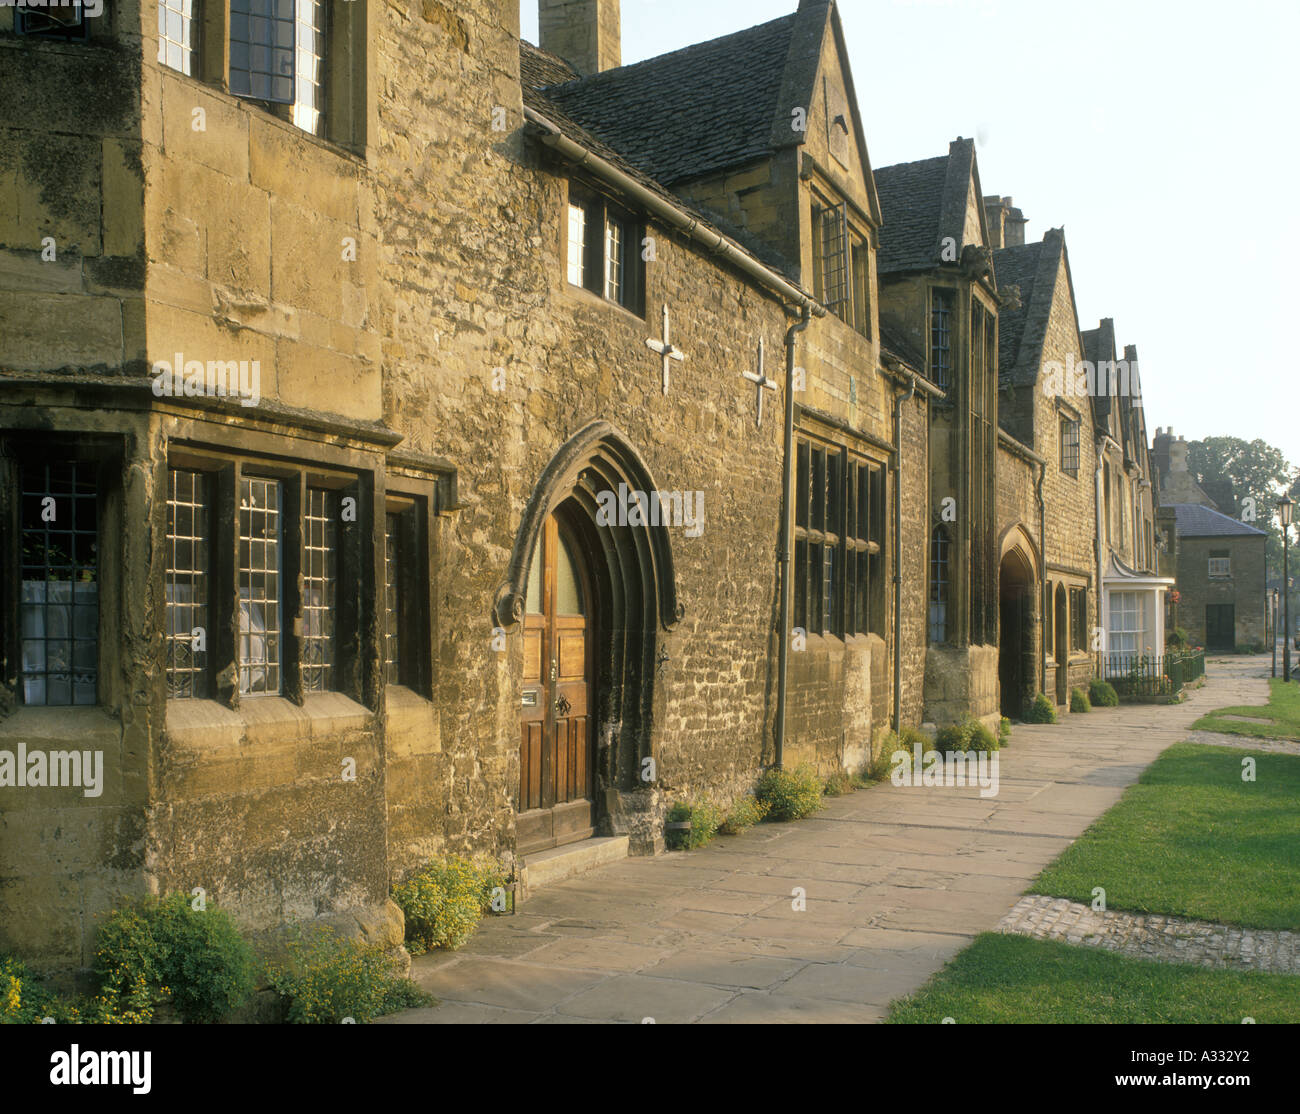 William Grevel's House in the High Street of the Cotswold town of Chipping Campden, Gloucestershire Stock Photo